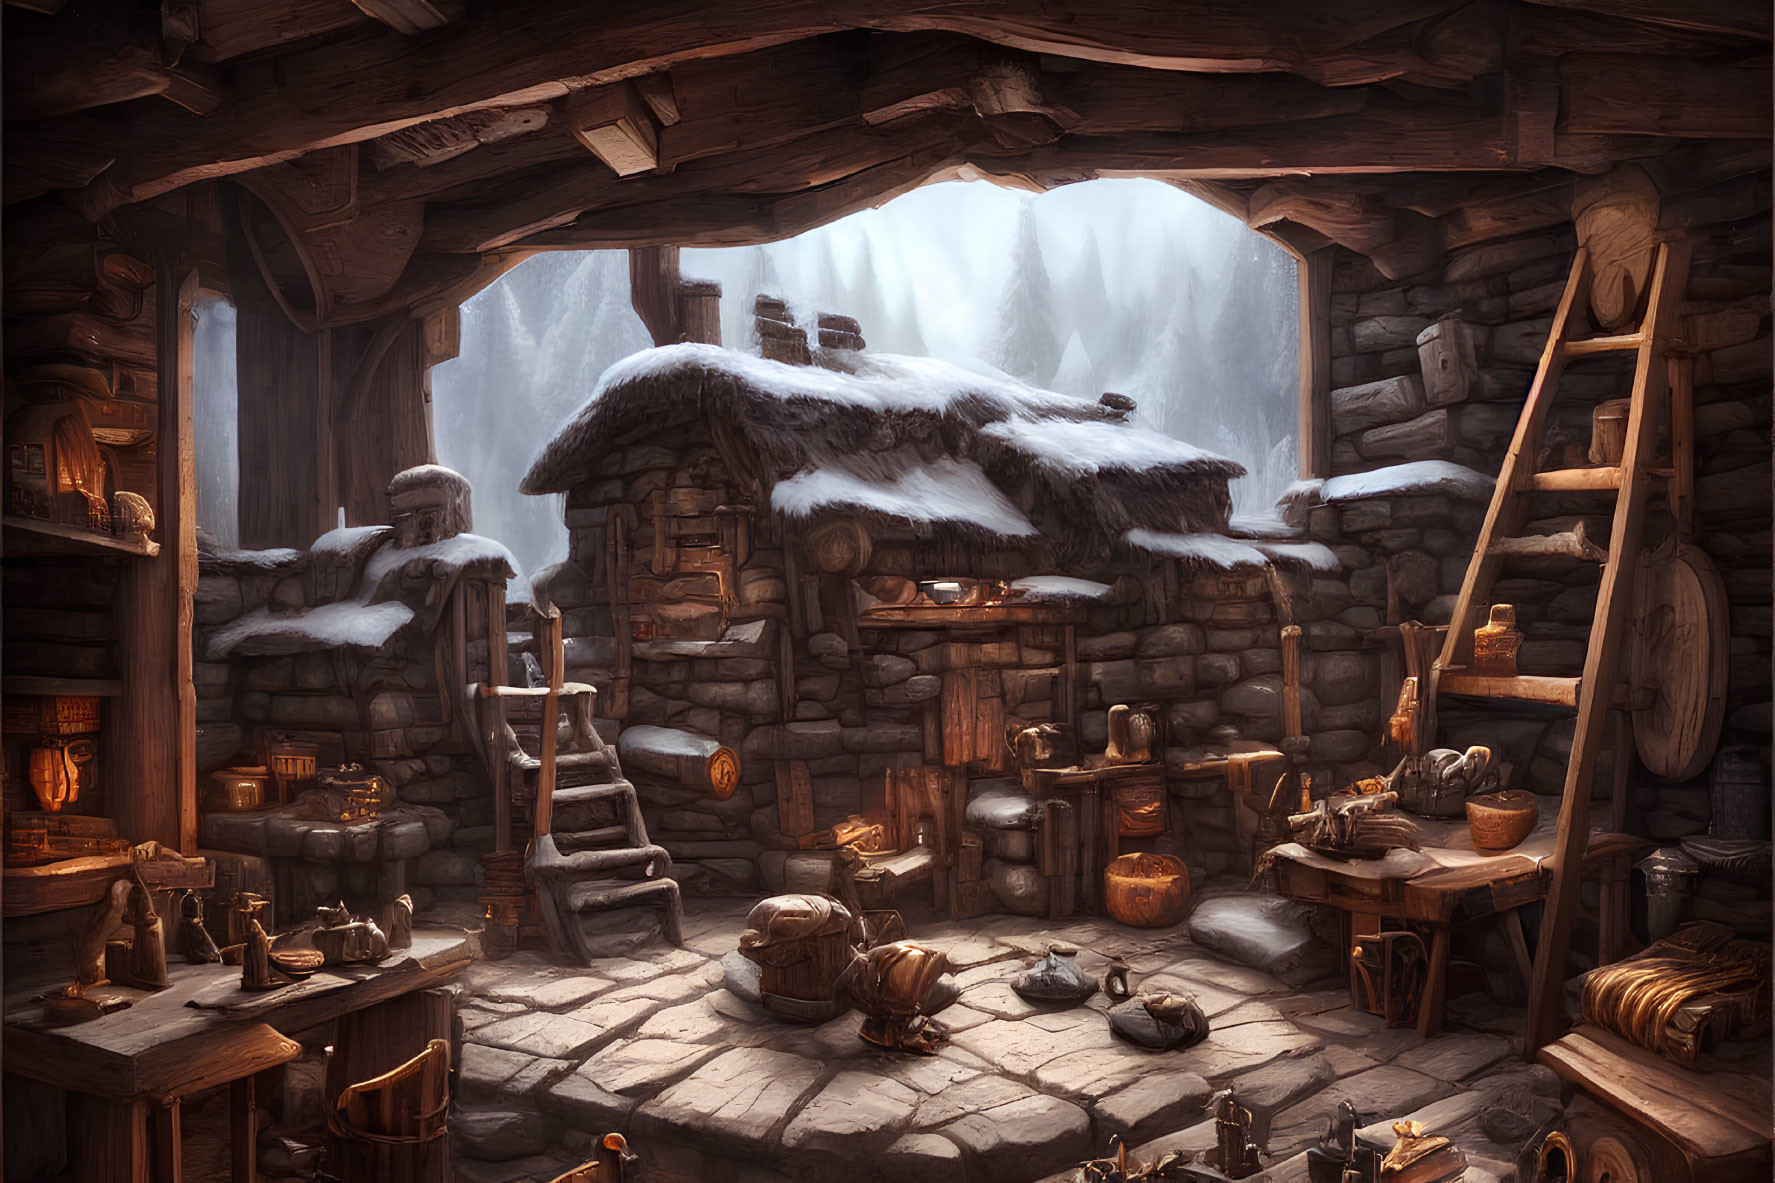 Snow-covered blacksmith's forge with scattered tools and warm light